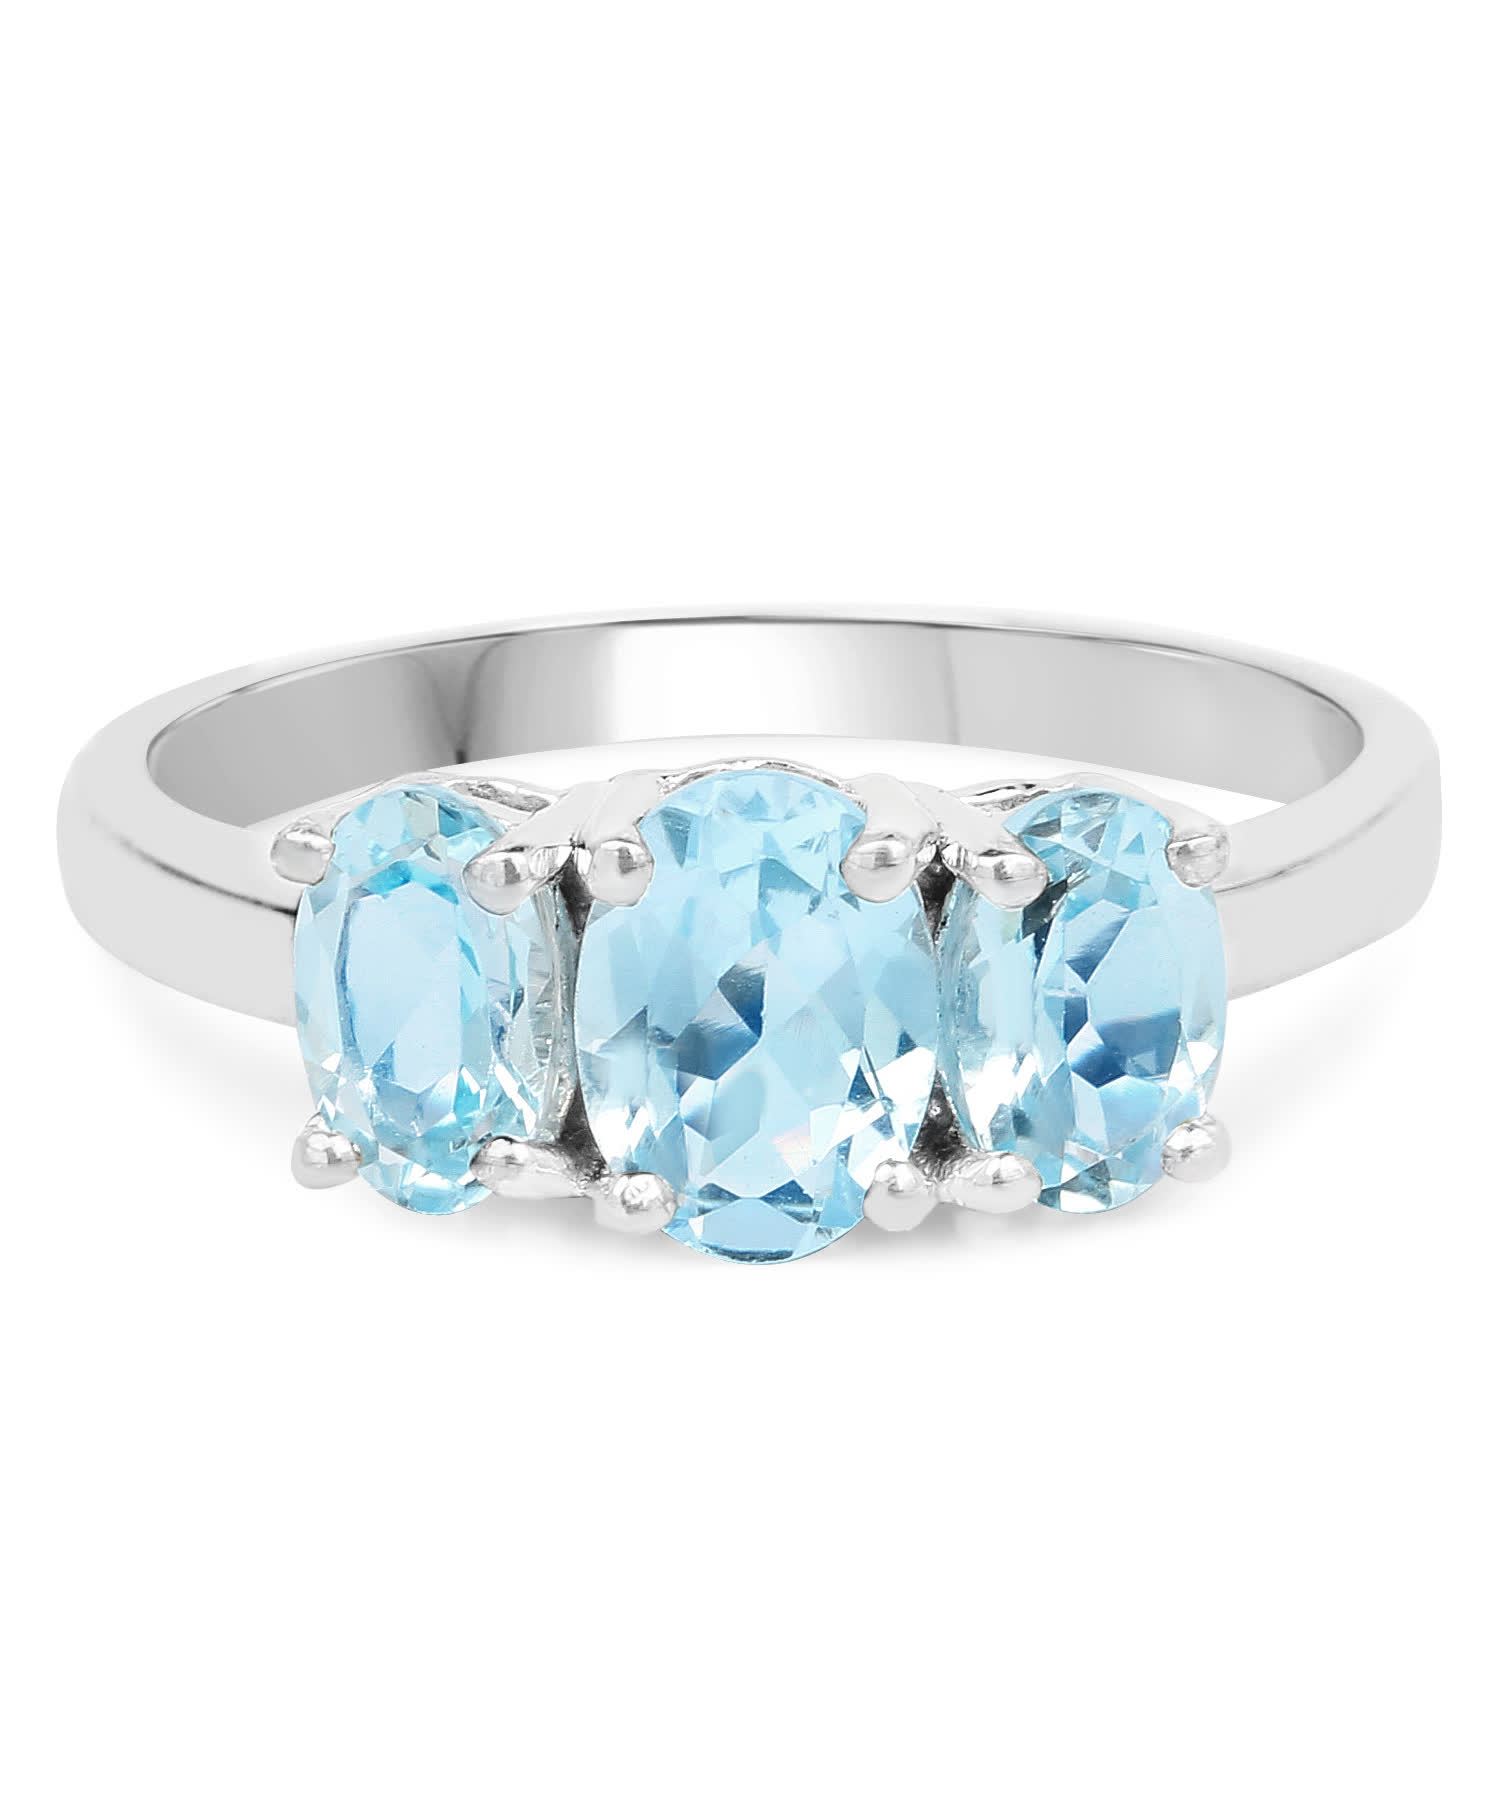 1.97ctw Natural Sky Blue Topaz Rhodium Plated 925 Sterling Silver Three-Stone Ring View 3